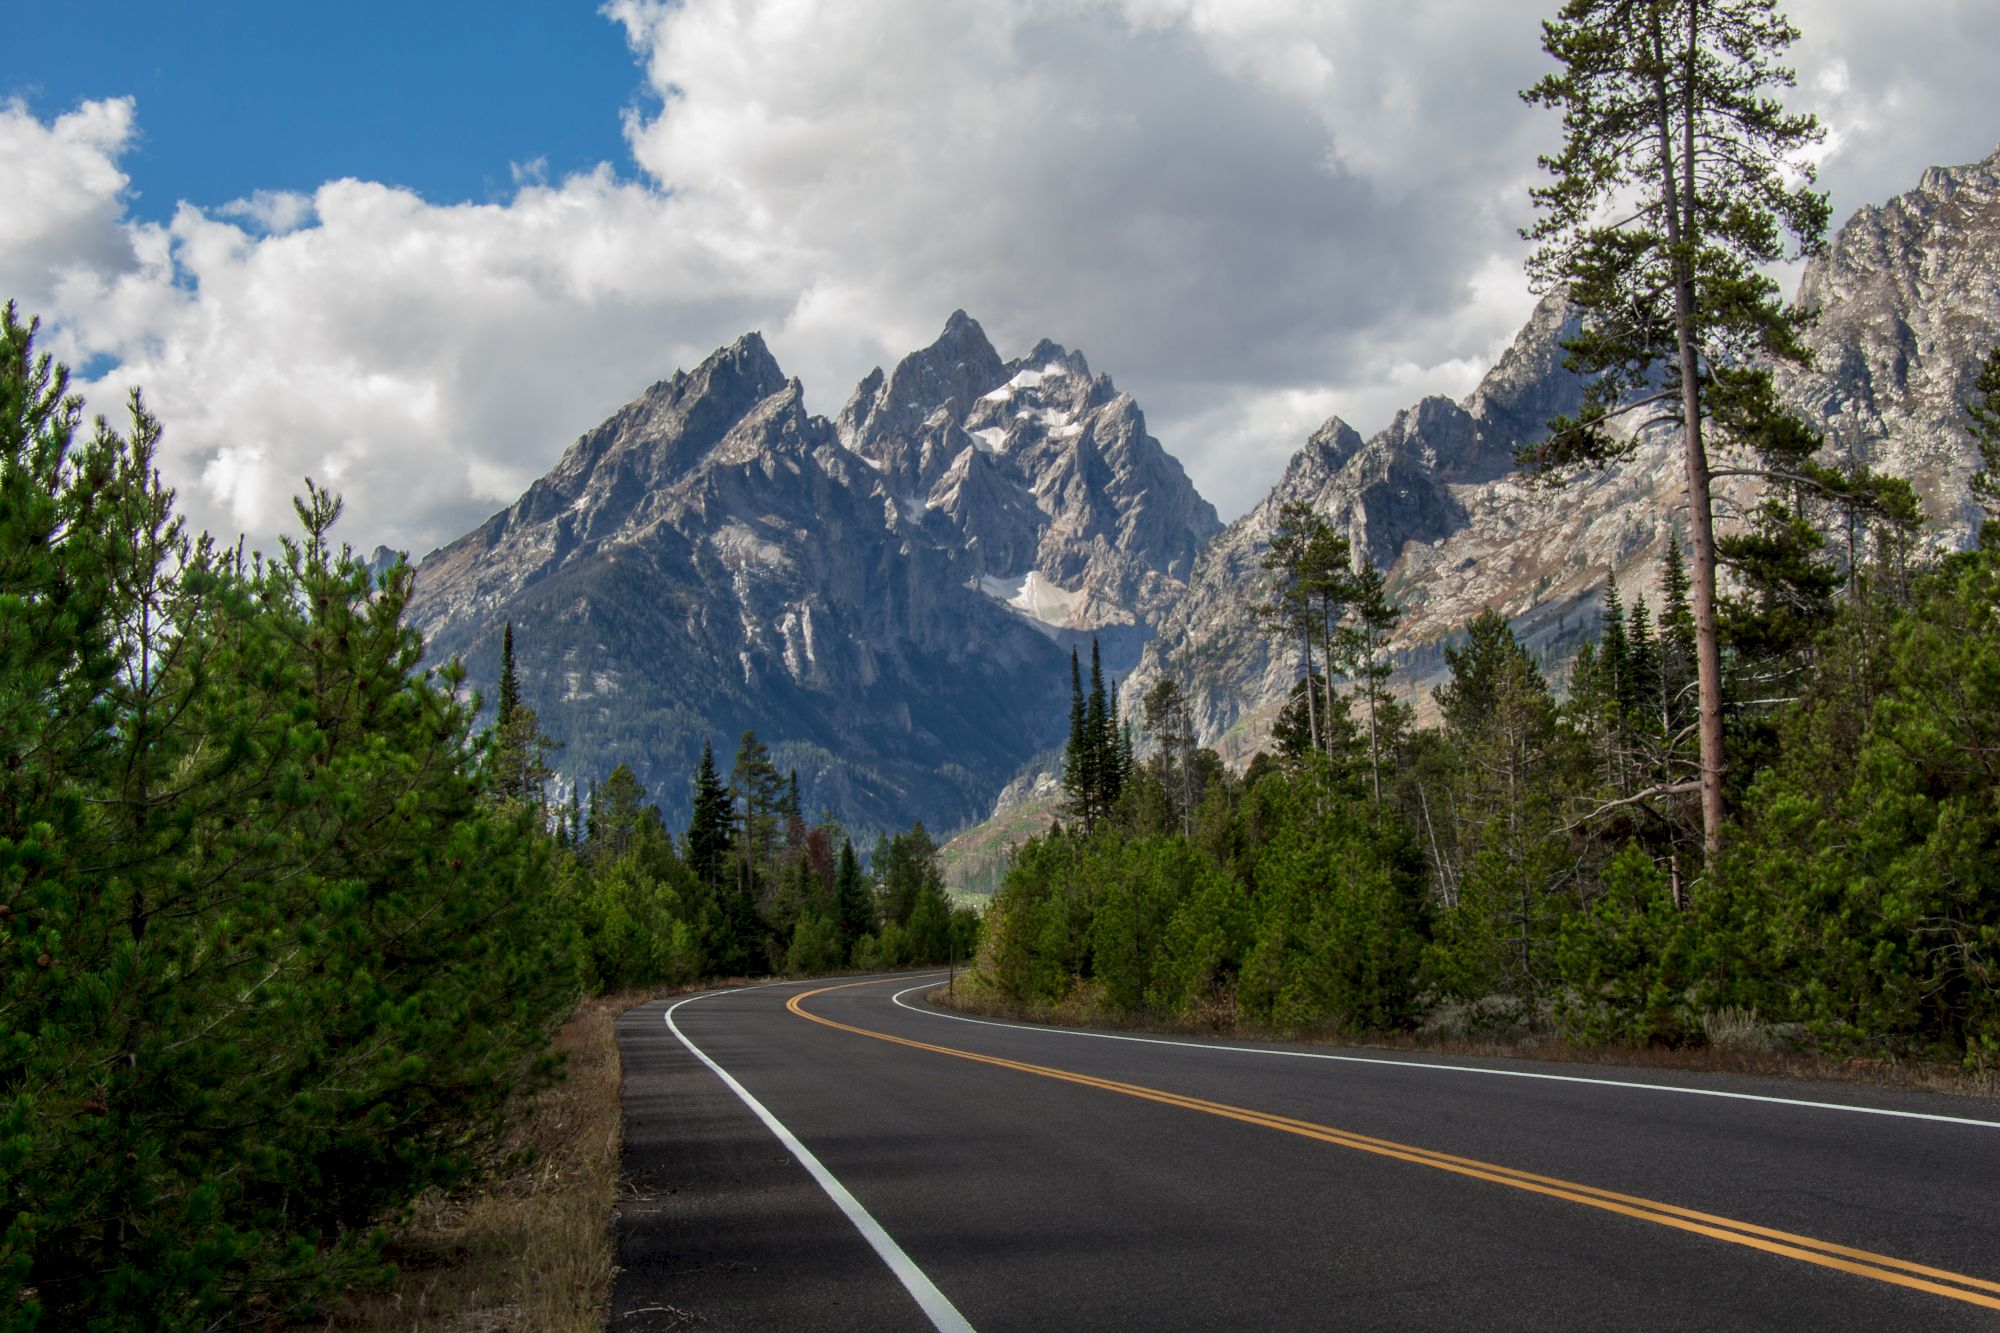 A scenic mountain range with peaked summits, a curving road lined by pine trees, and a partly cloudy sky in the background completes the scene.